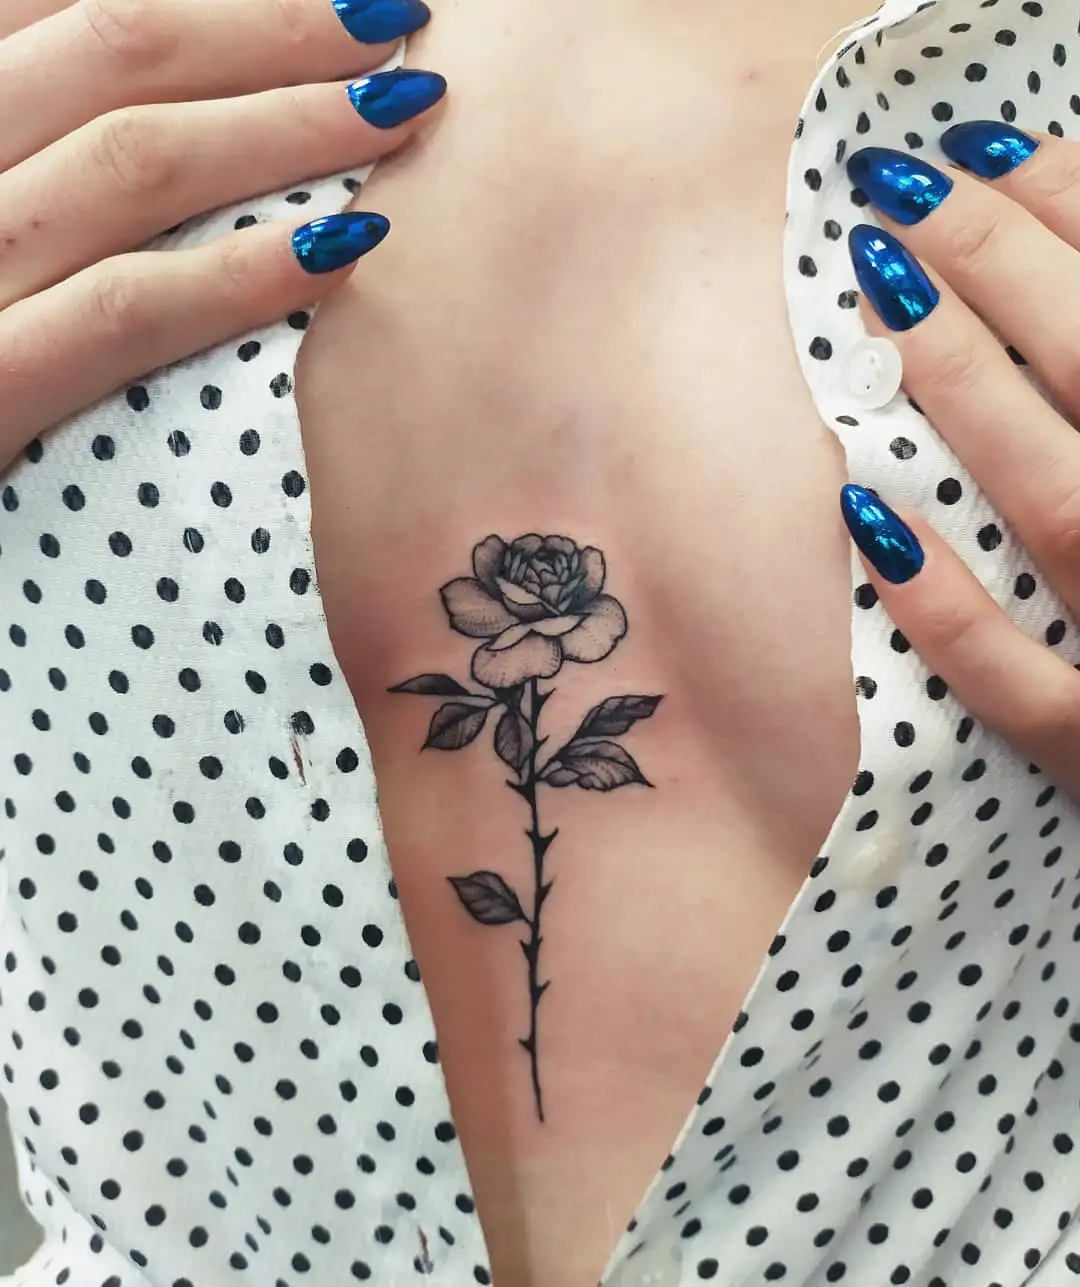 15 Tattoos Under The Boob To Get Your Inspired